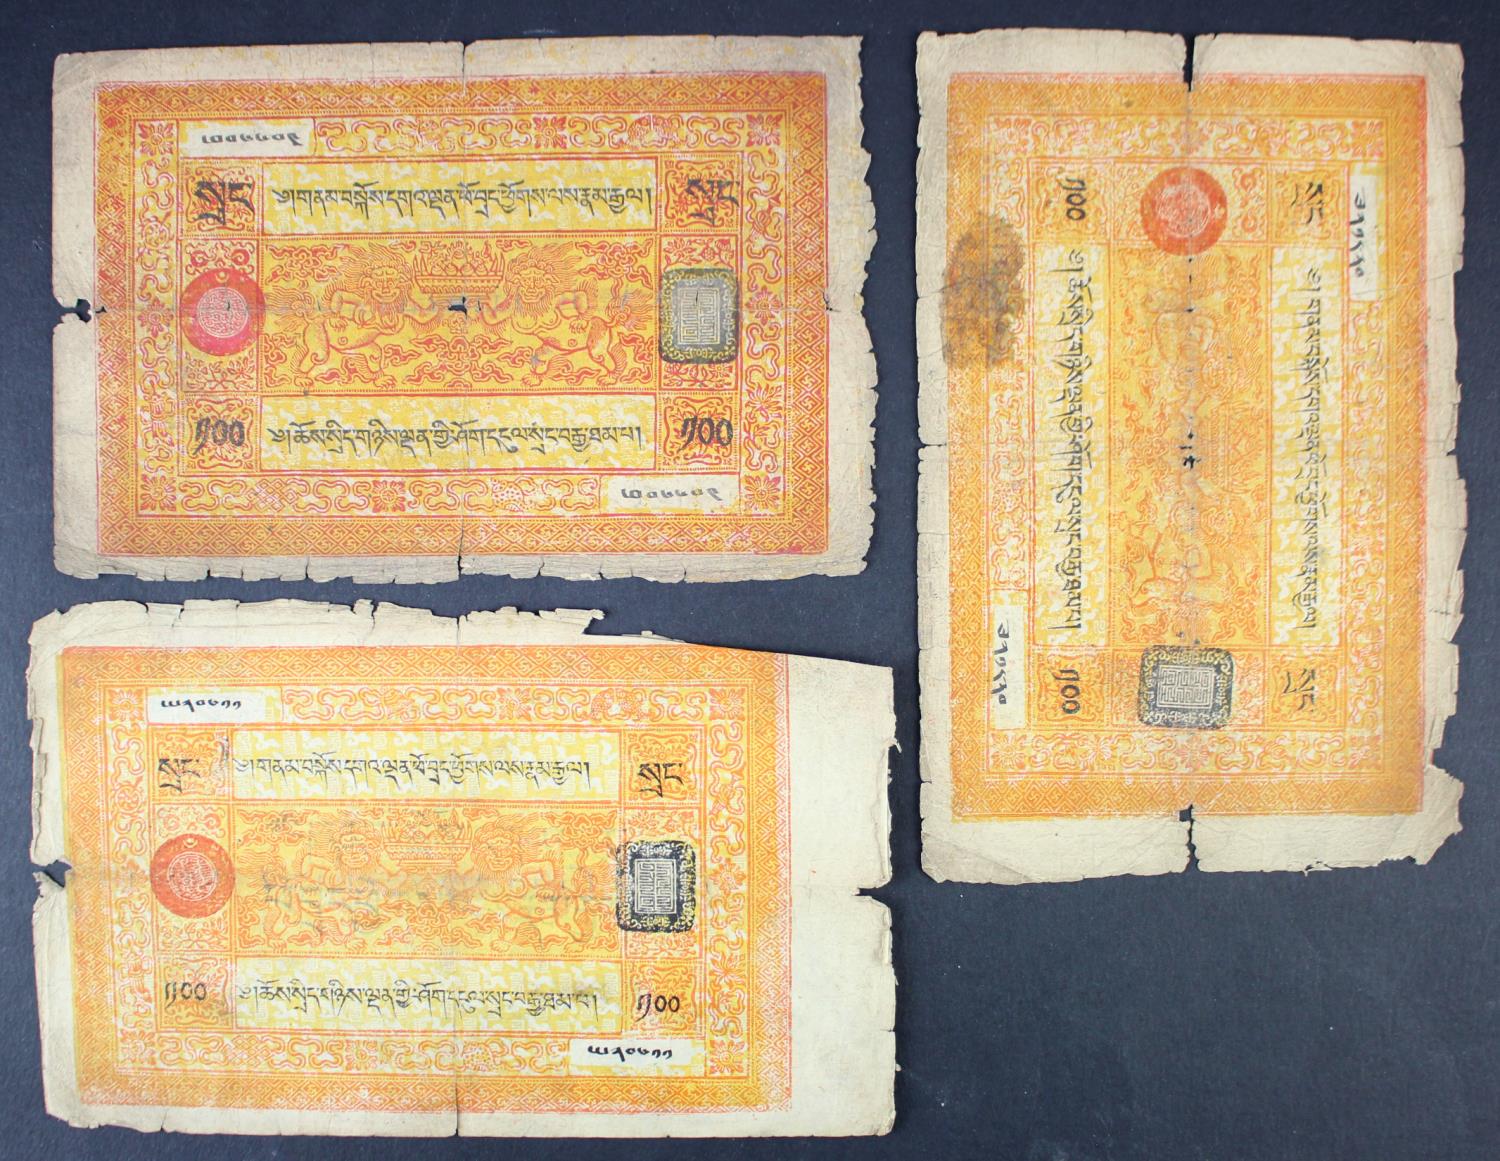 Tibet 100 Srang (3) issued 1942 - 1959 (BNB B113, Pick11) lower grades with tears/holes/dirt